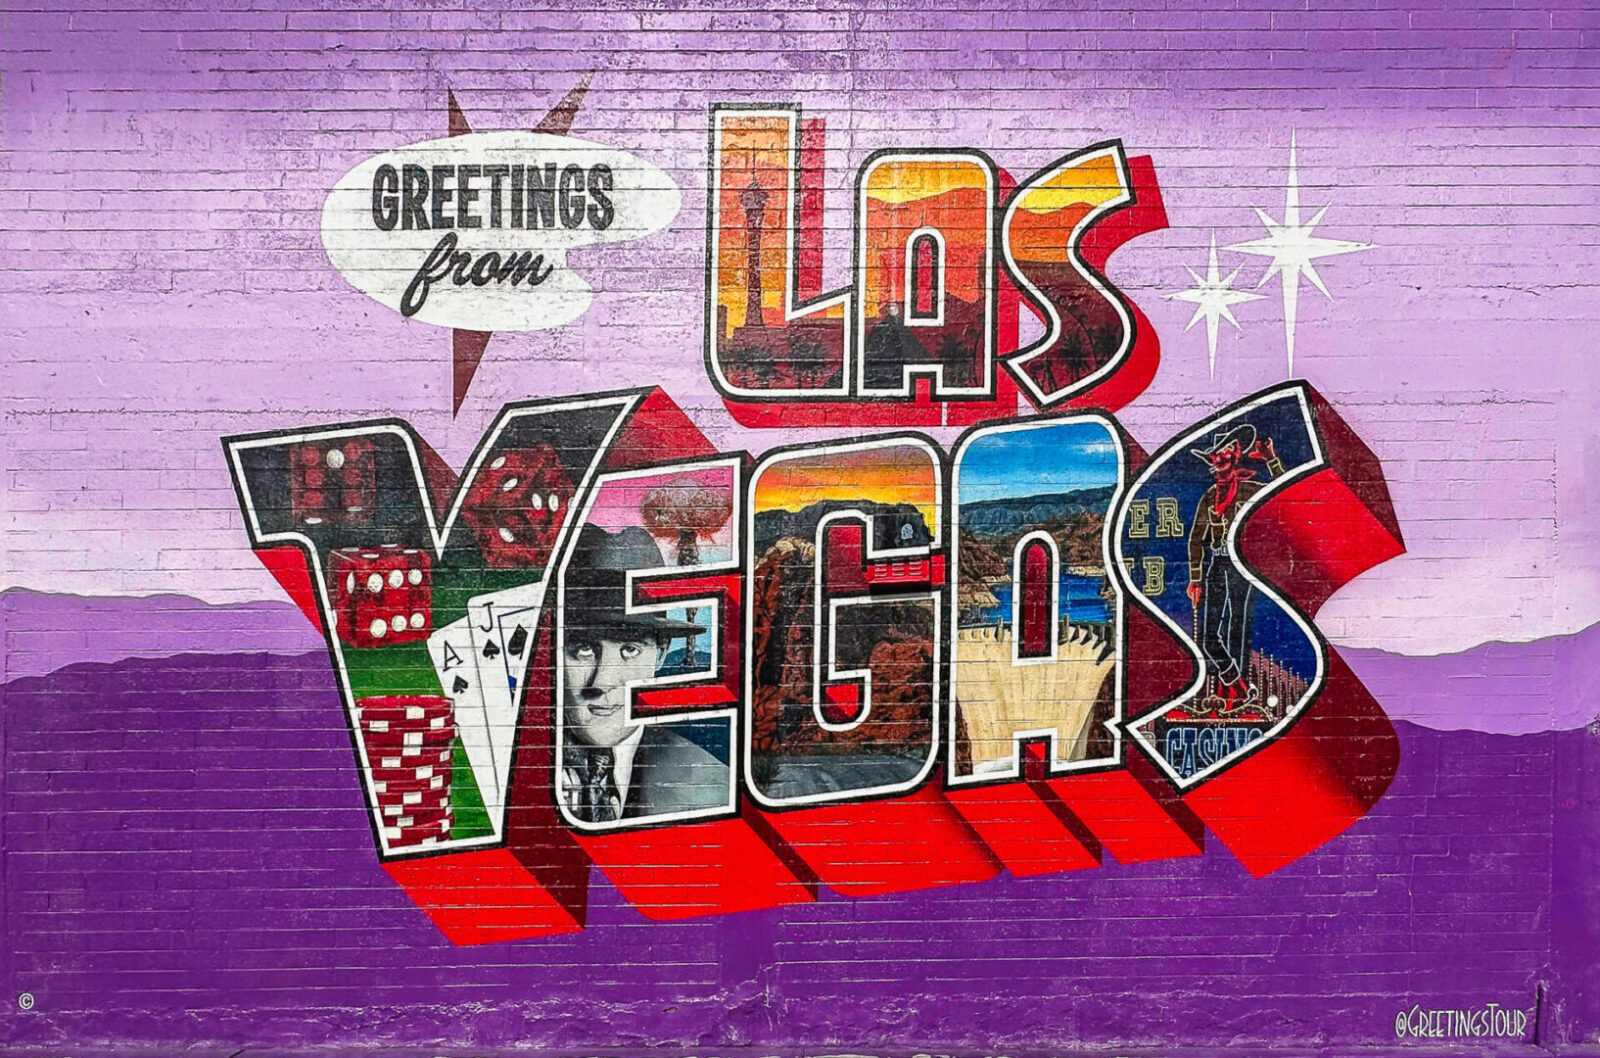 Greetings from Las Vegas poster with some images